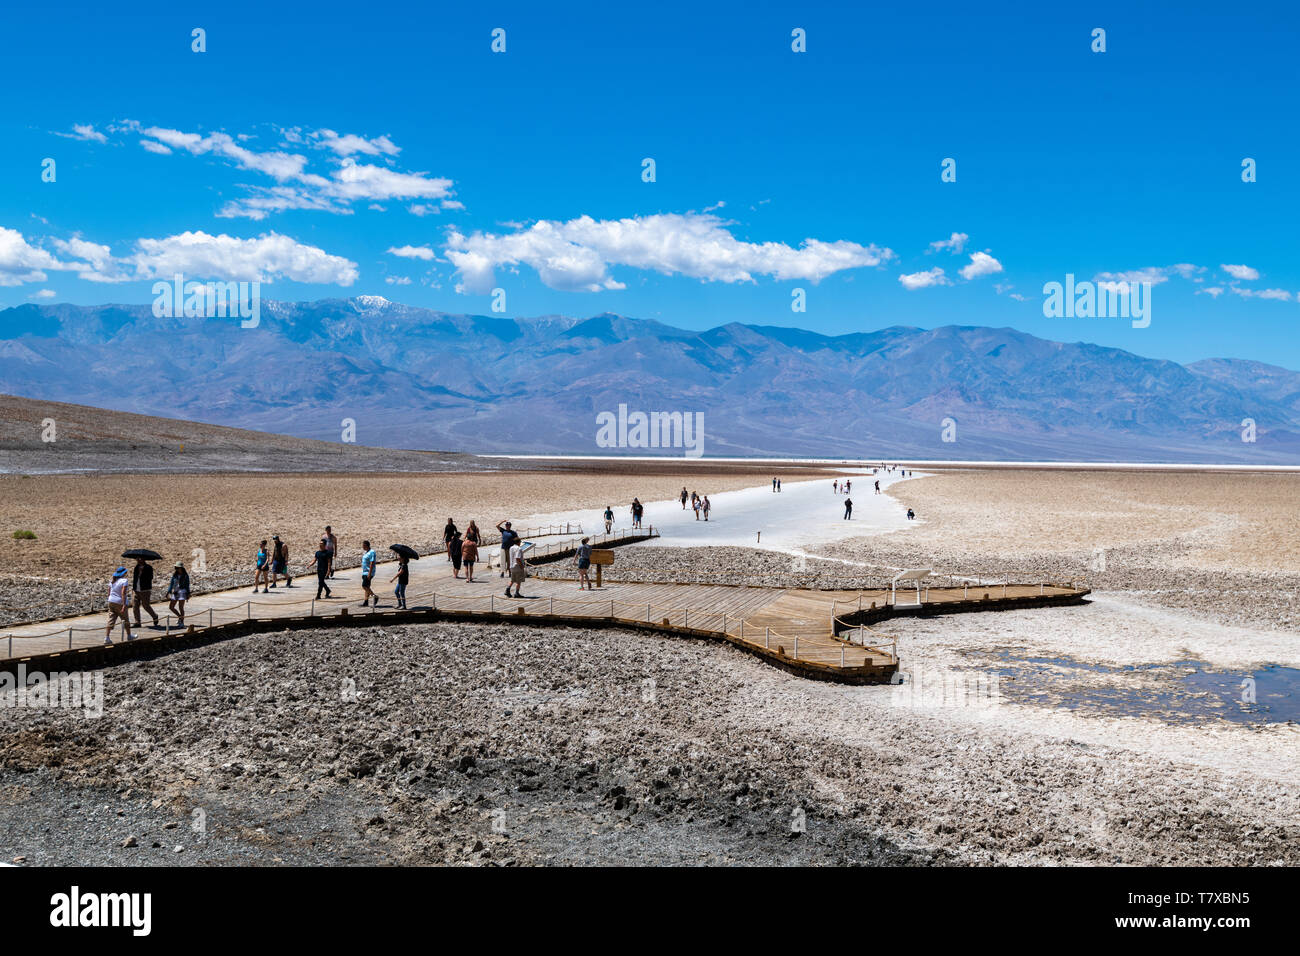 Landscape, Badwater Basin, Death Valley National Park, California, USA. Tourists *** Local Caption *** Stock Photo